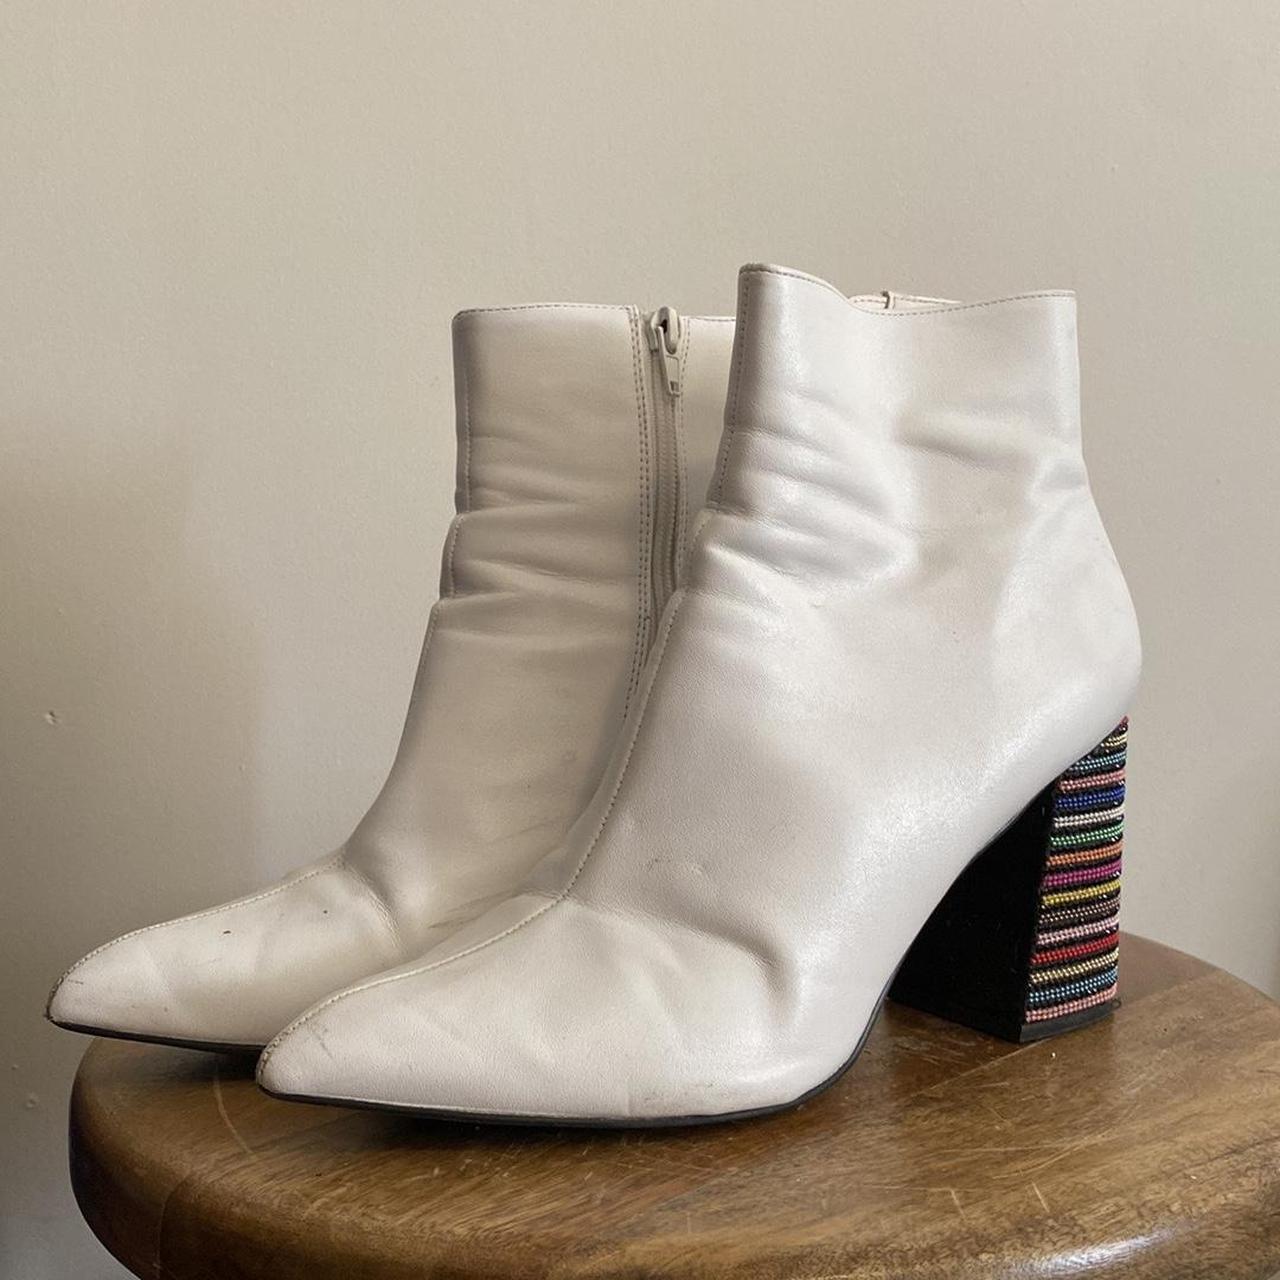 Betsy Johnson white leather ankle boots. Zip up. Has... - Depop